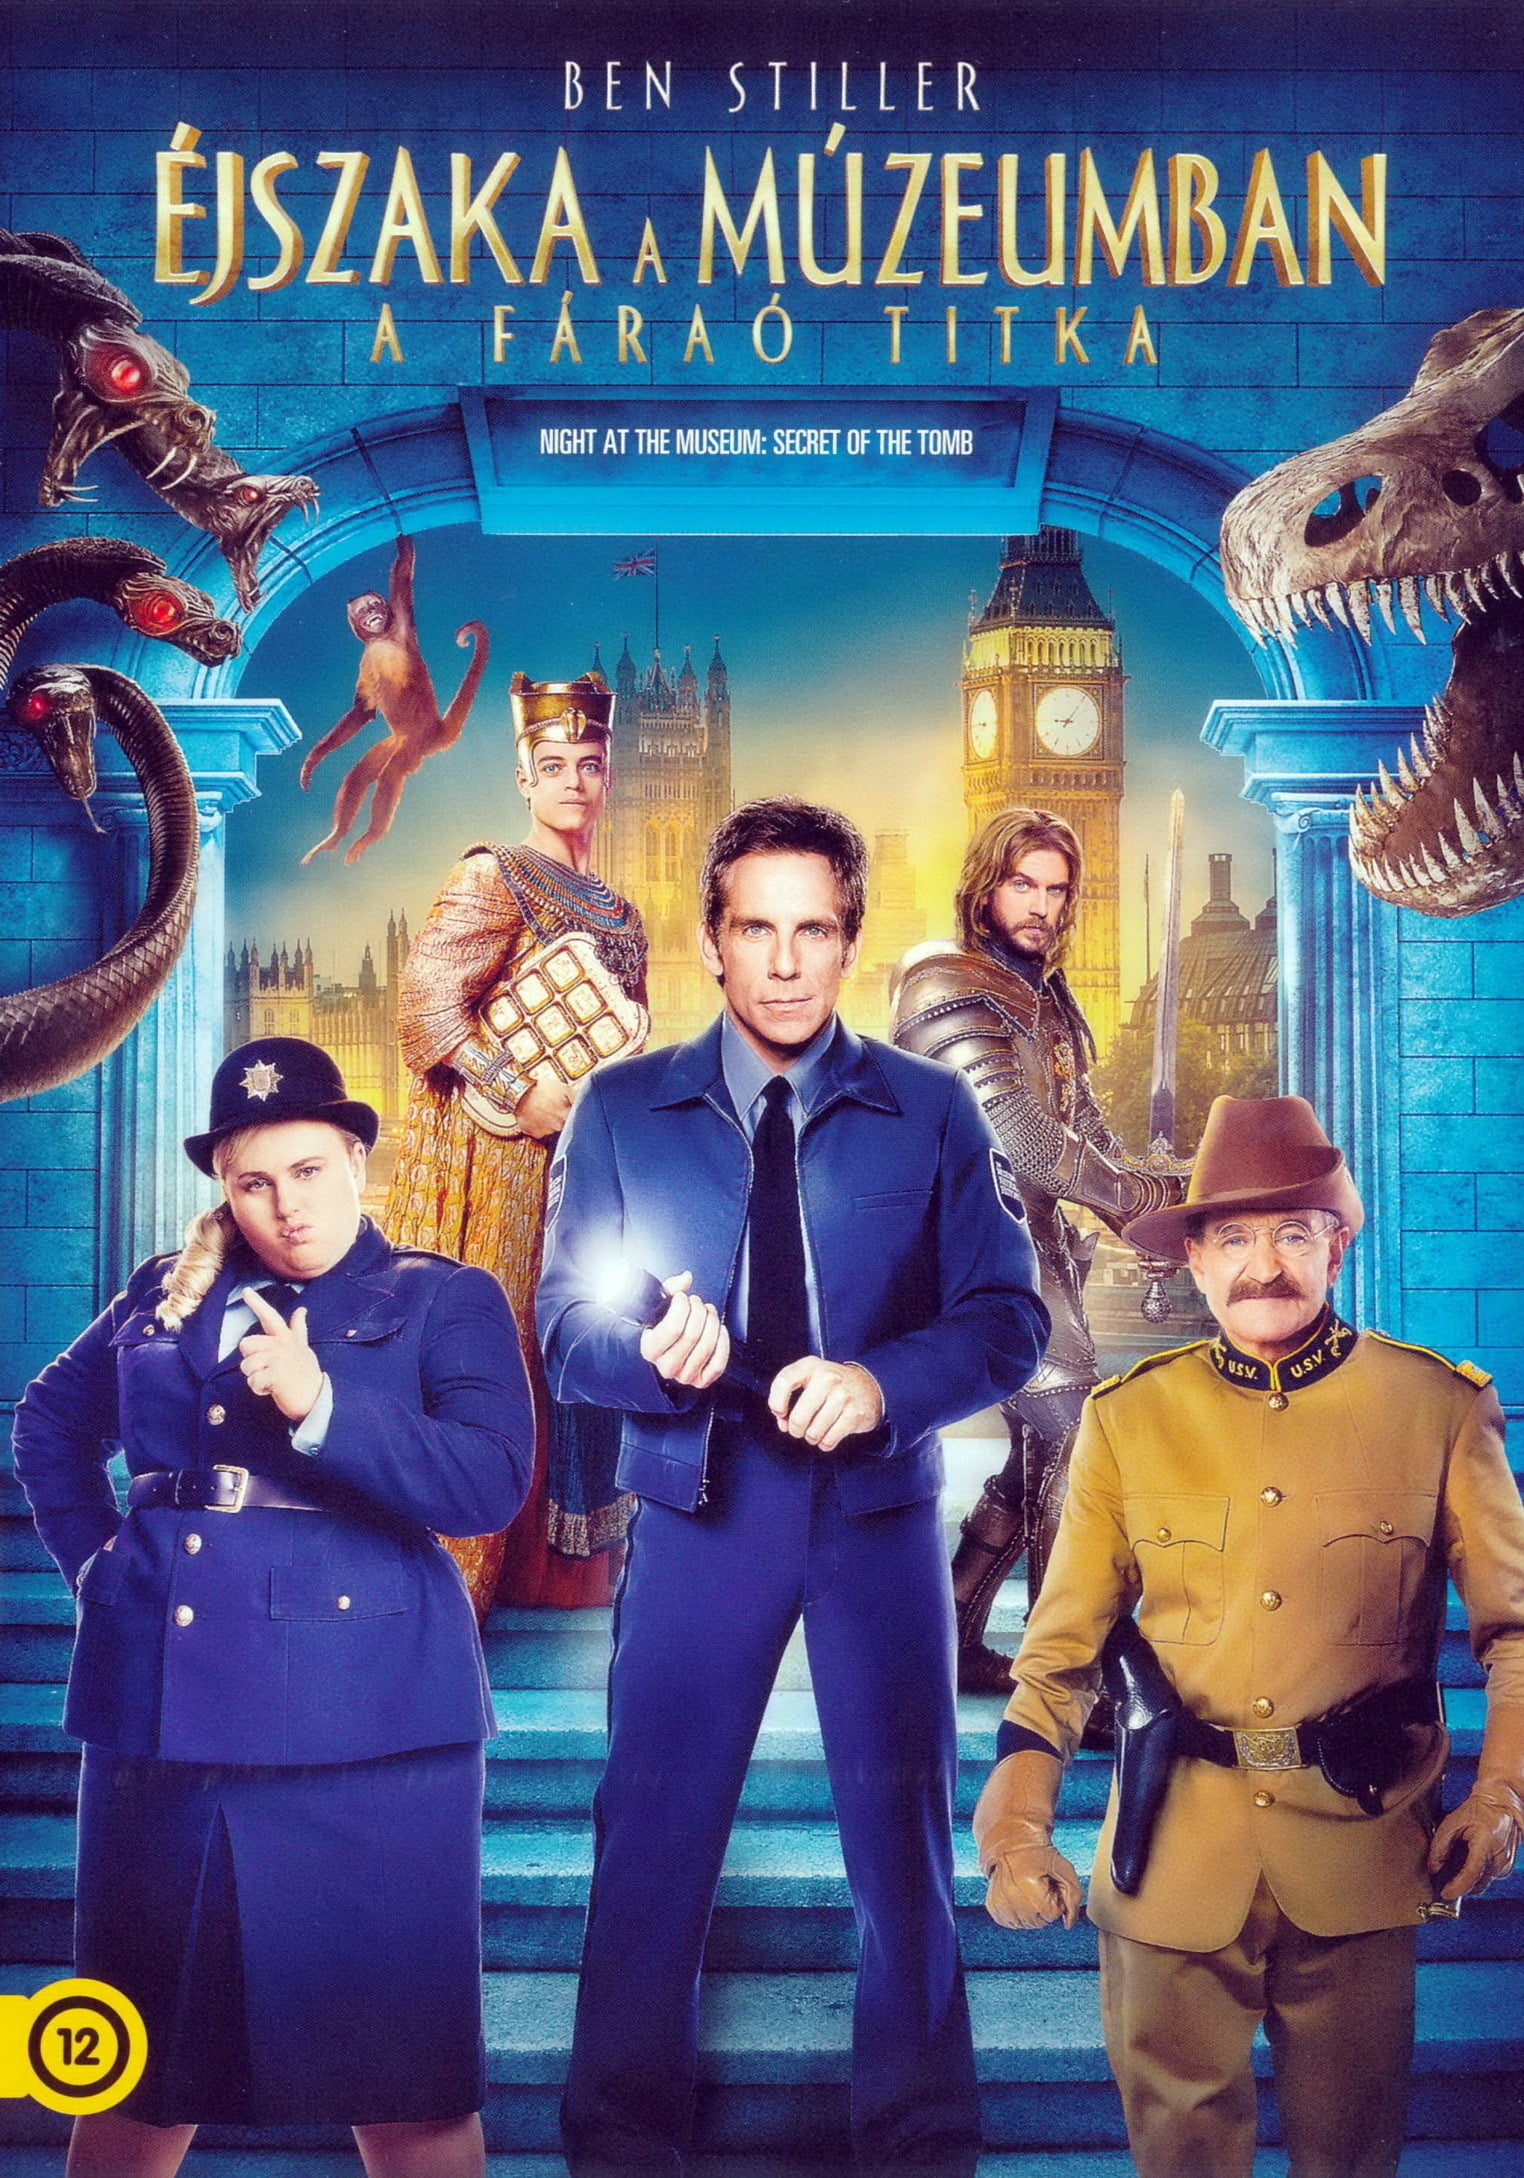 night at the museum 3 hindi dubbed movie download 480p